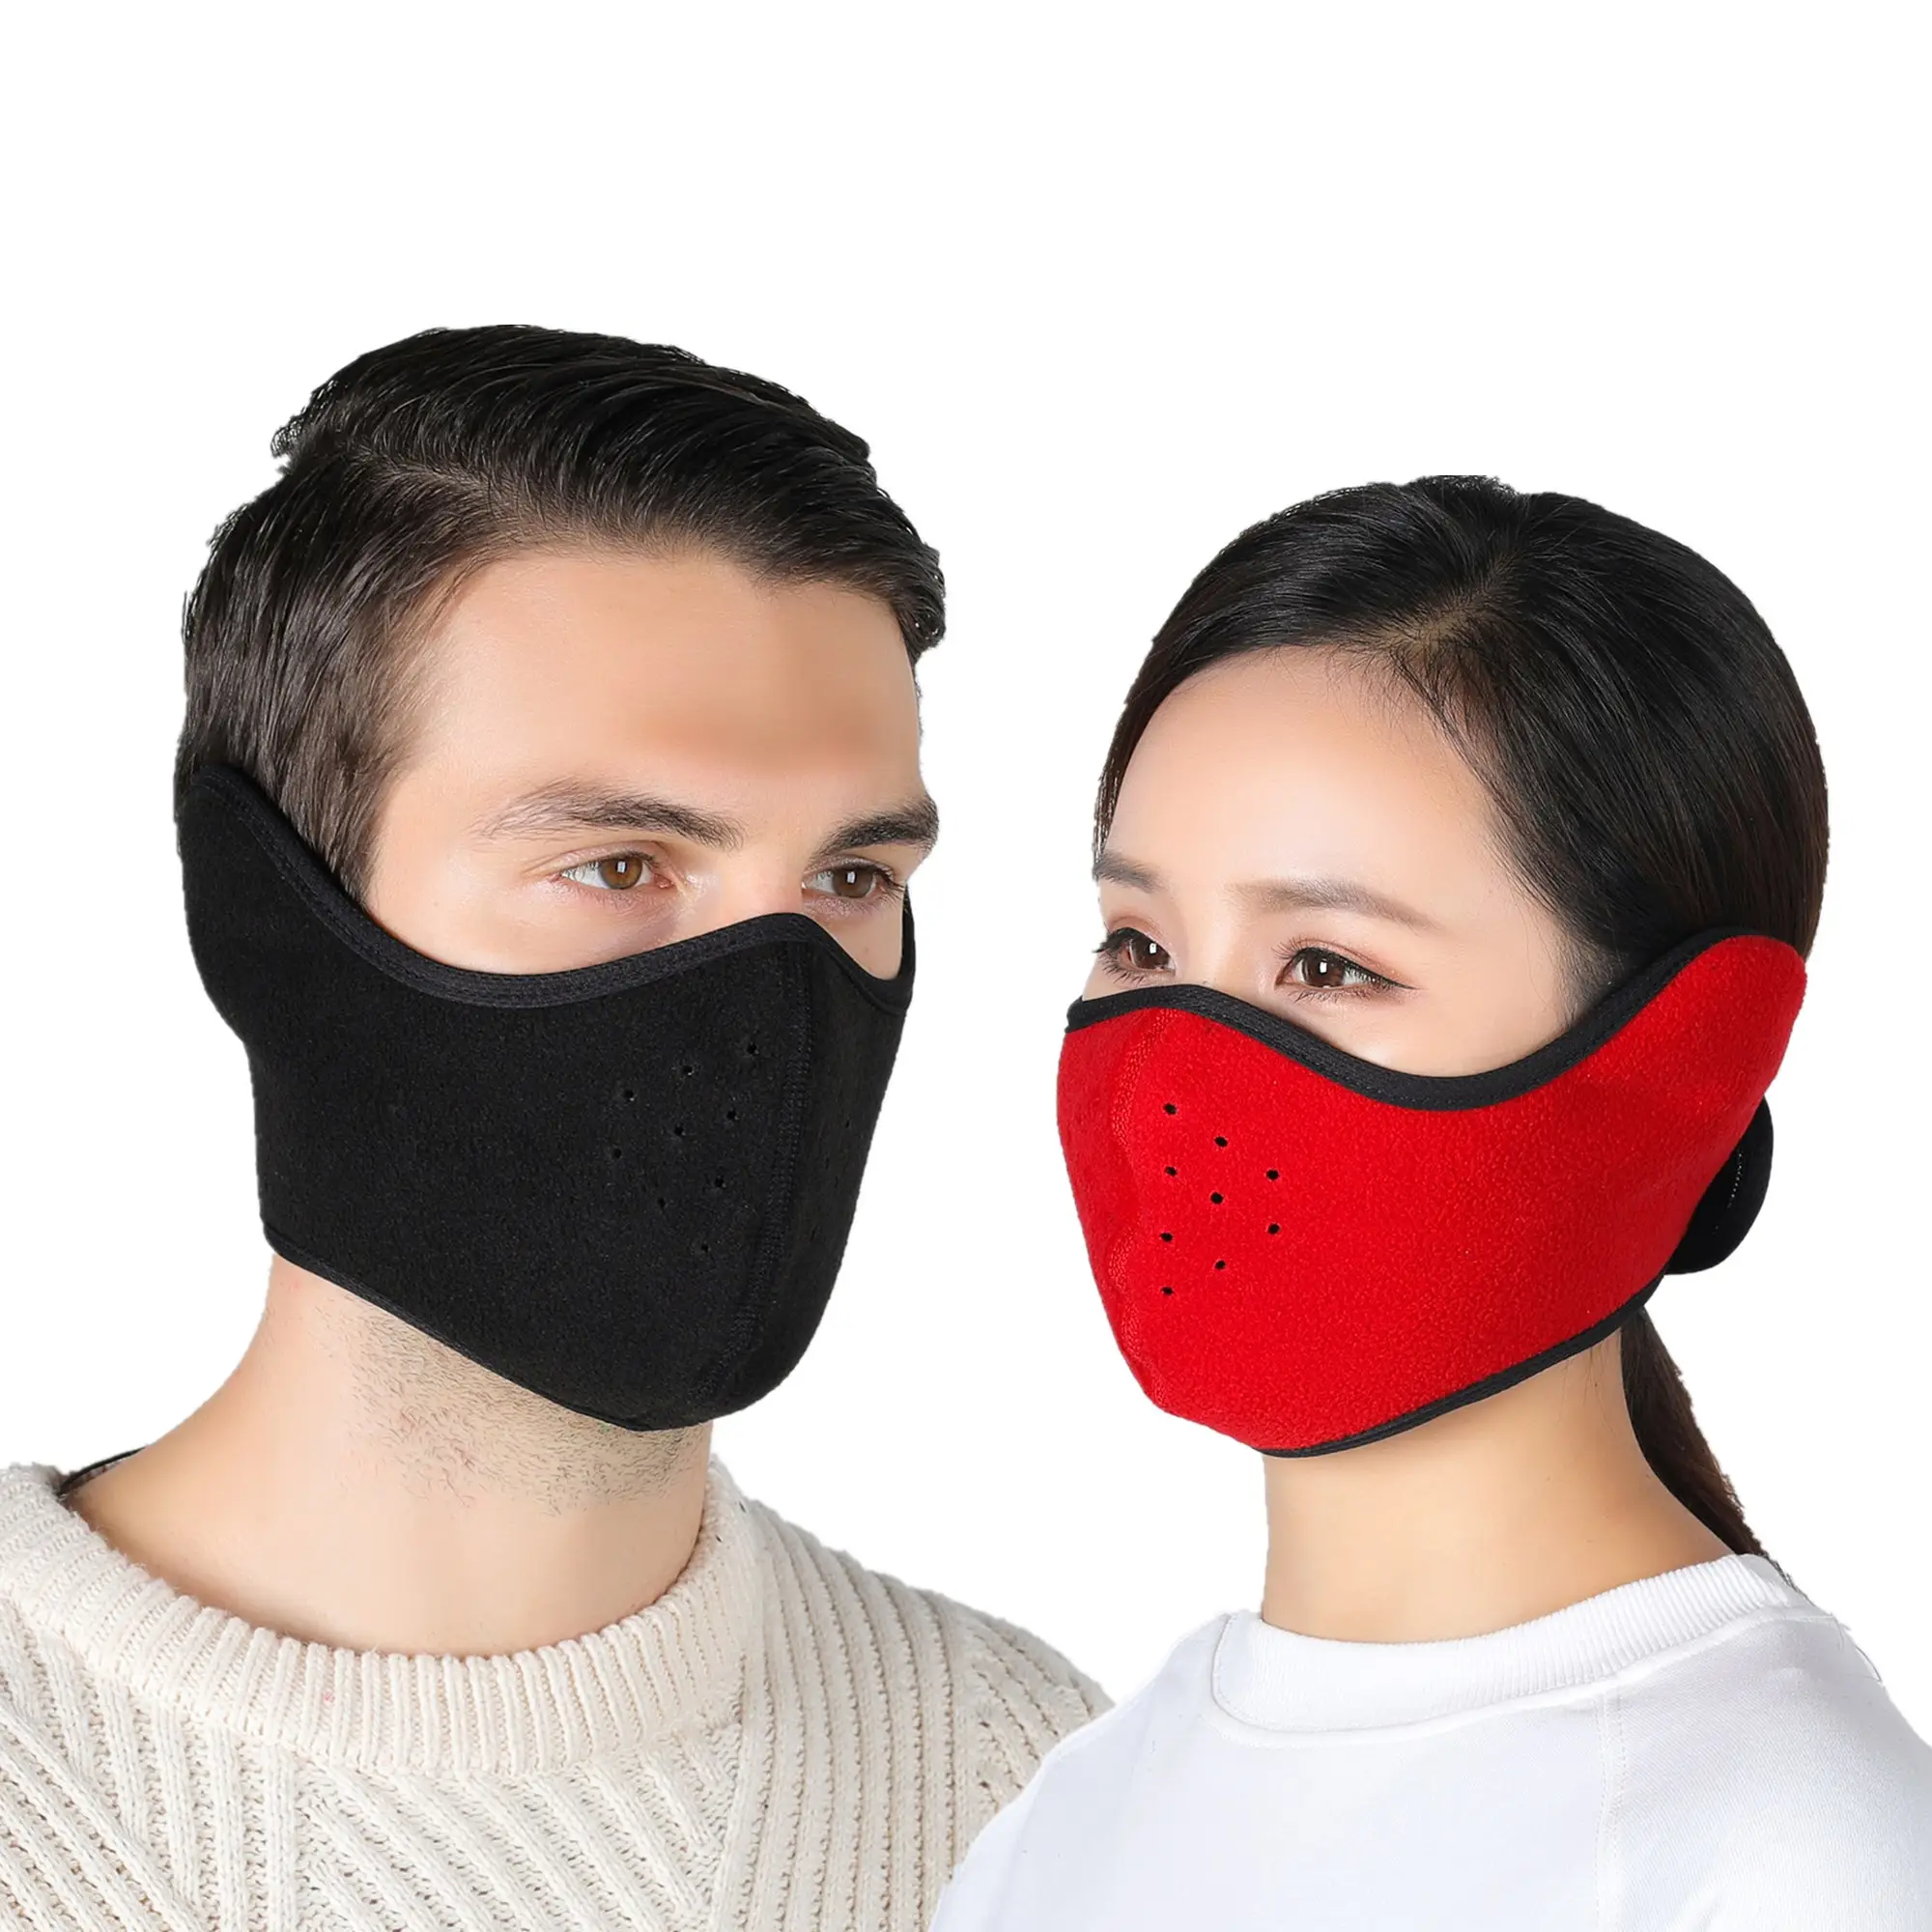 Winter Outdoor Sports Breathable Ski Face Mask Black Motorcycle Warm Earflap Mask for Men And Women